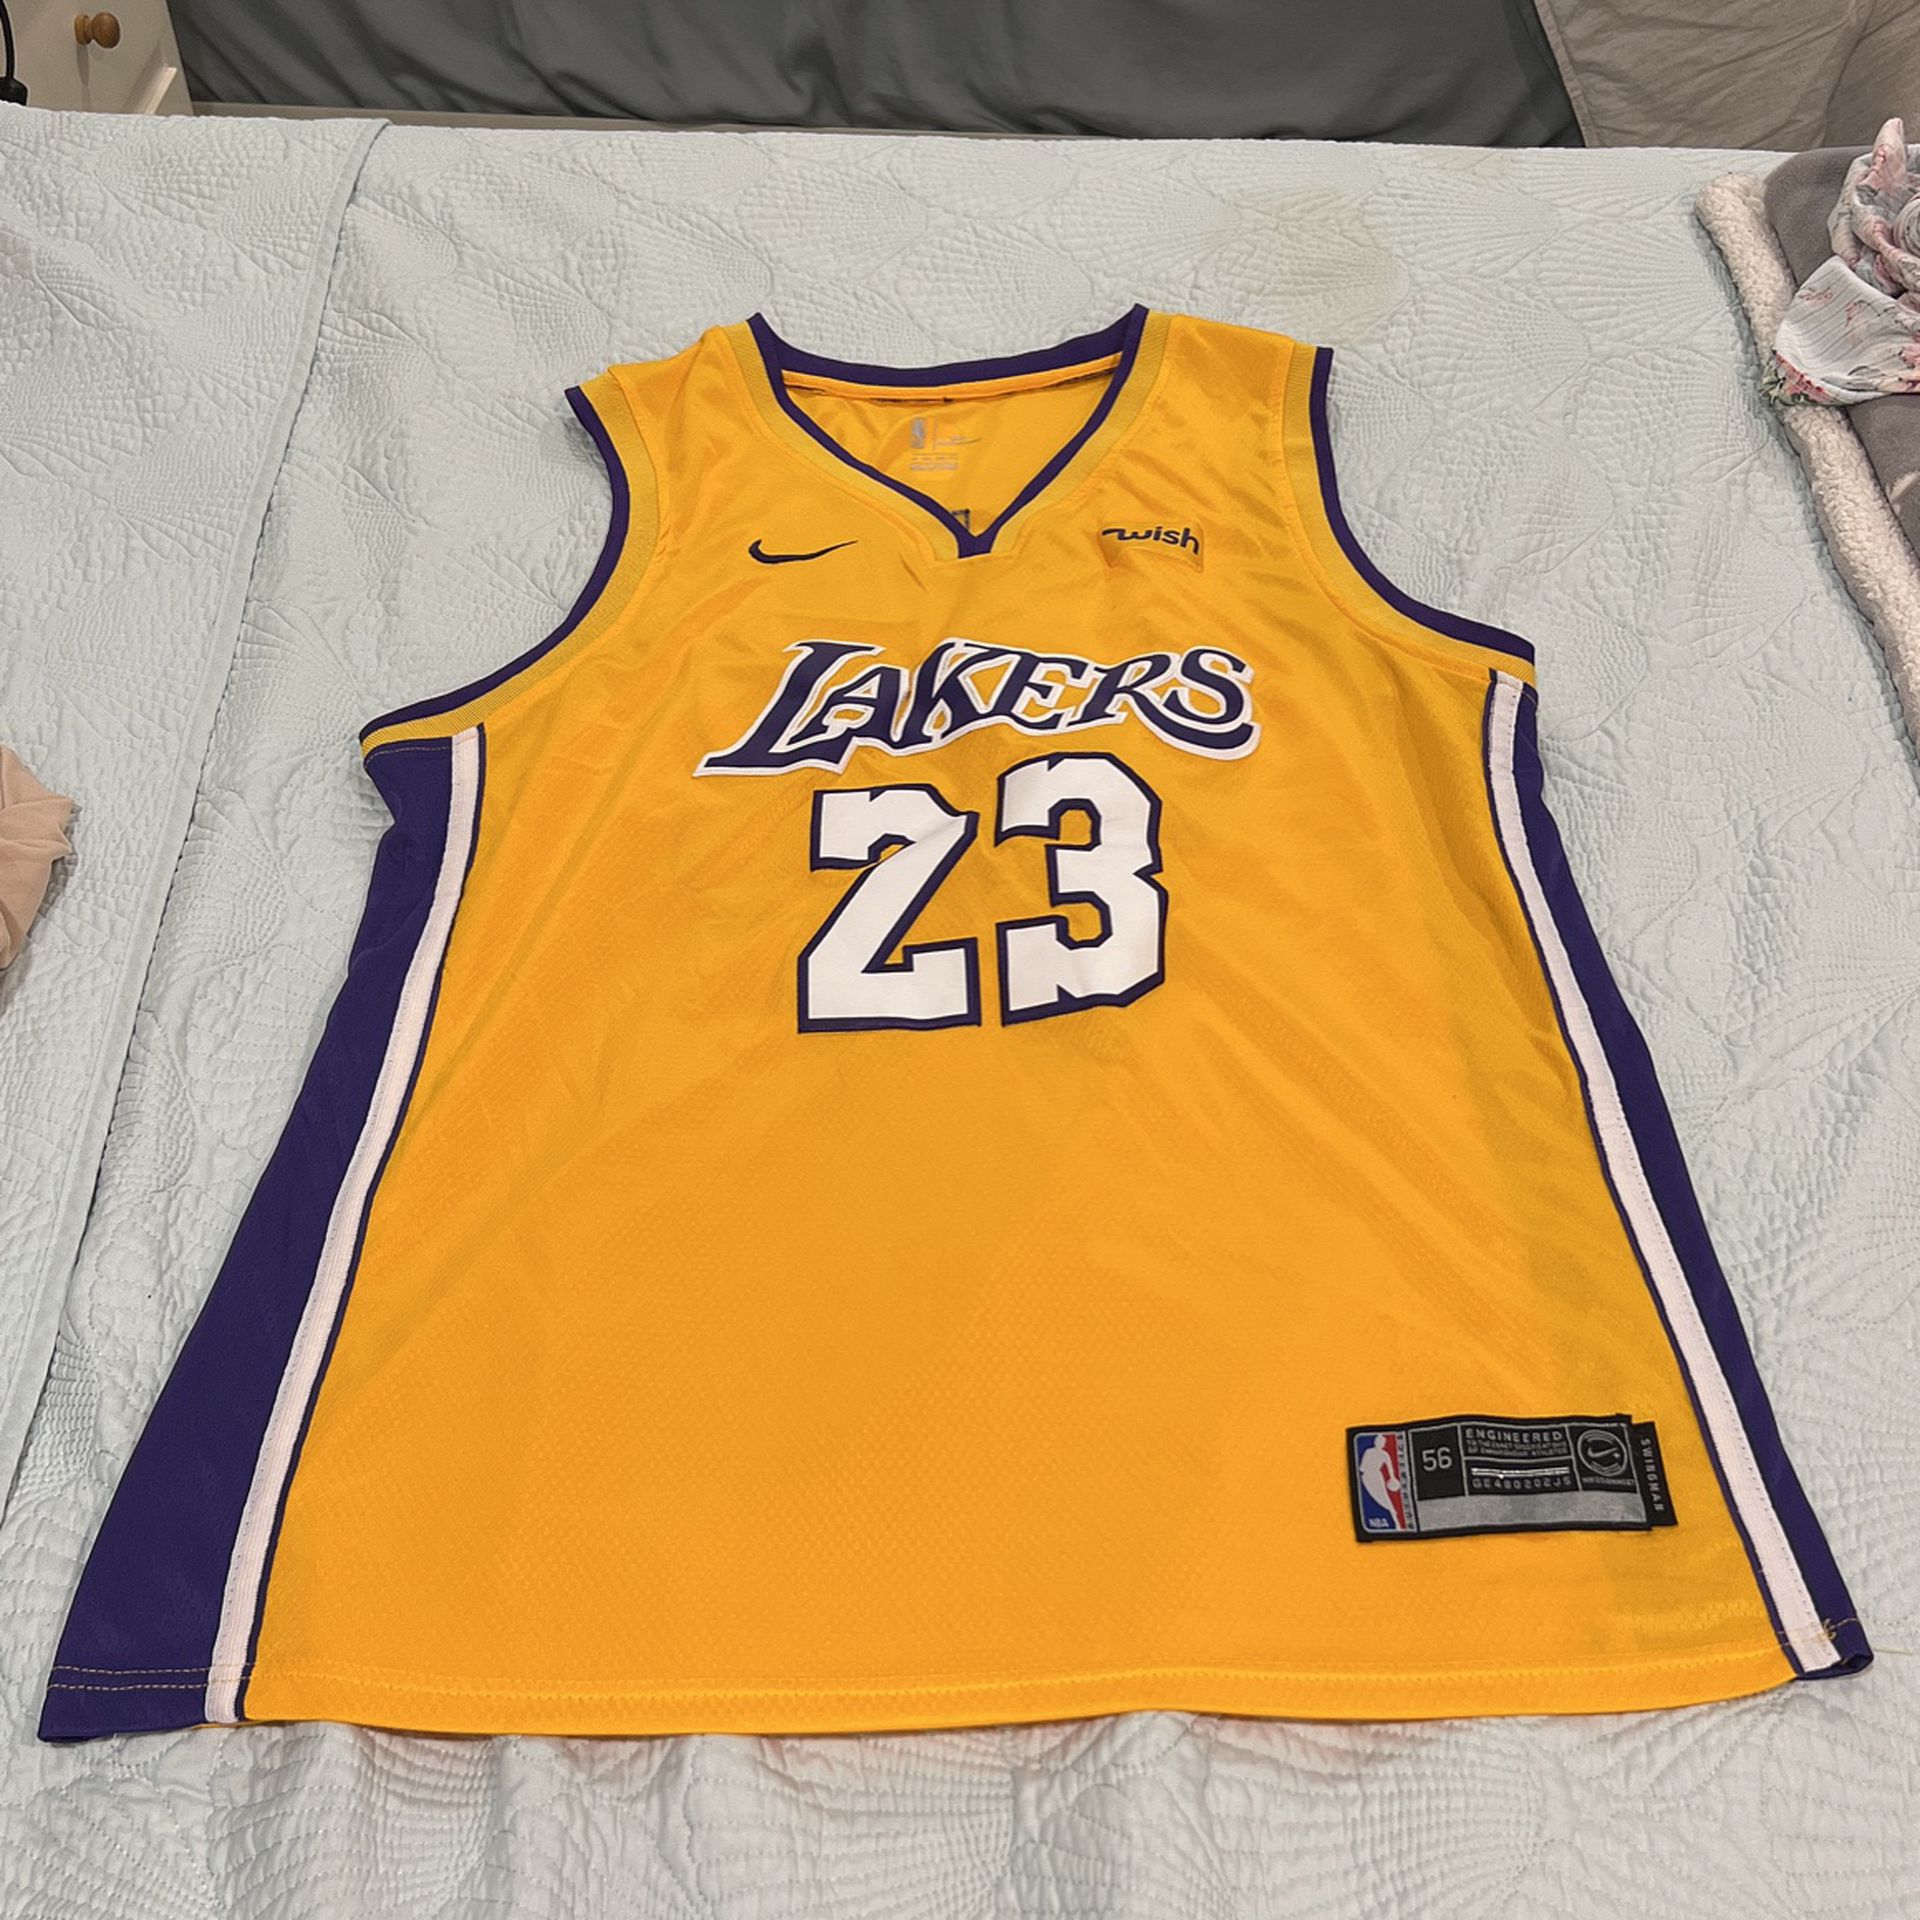 Ucla Basketball Jersey Theta Number 0 for Sale in Los Angeles, CA - OfferUp